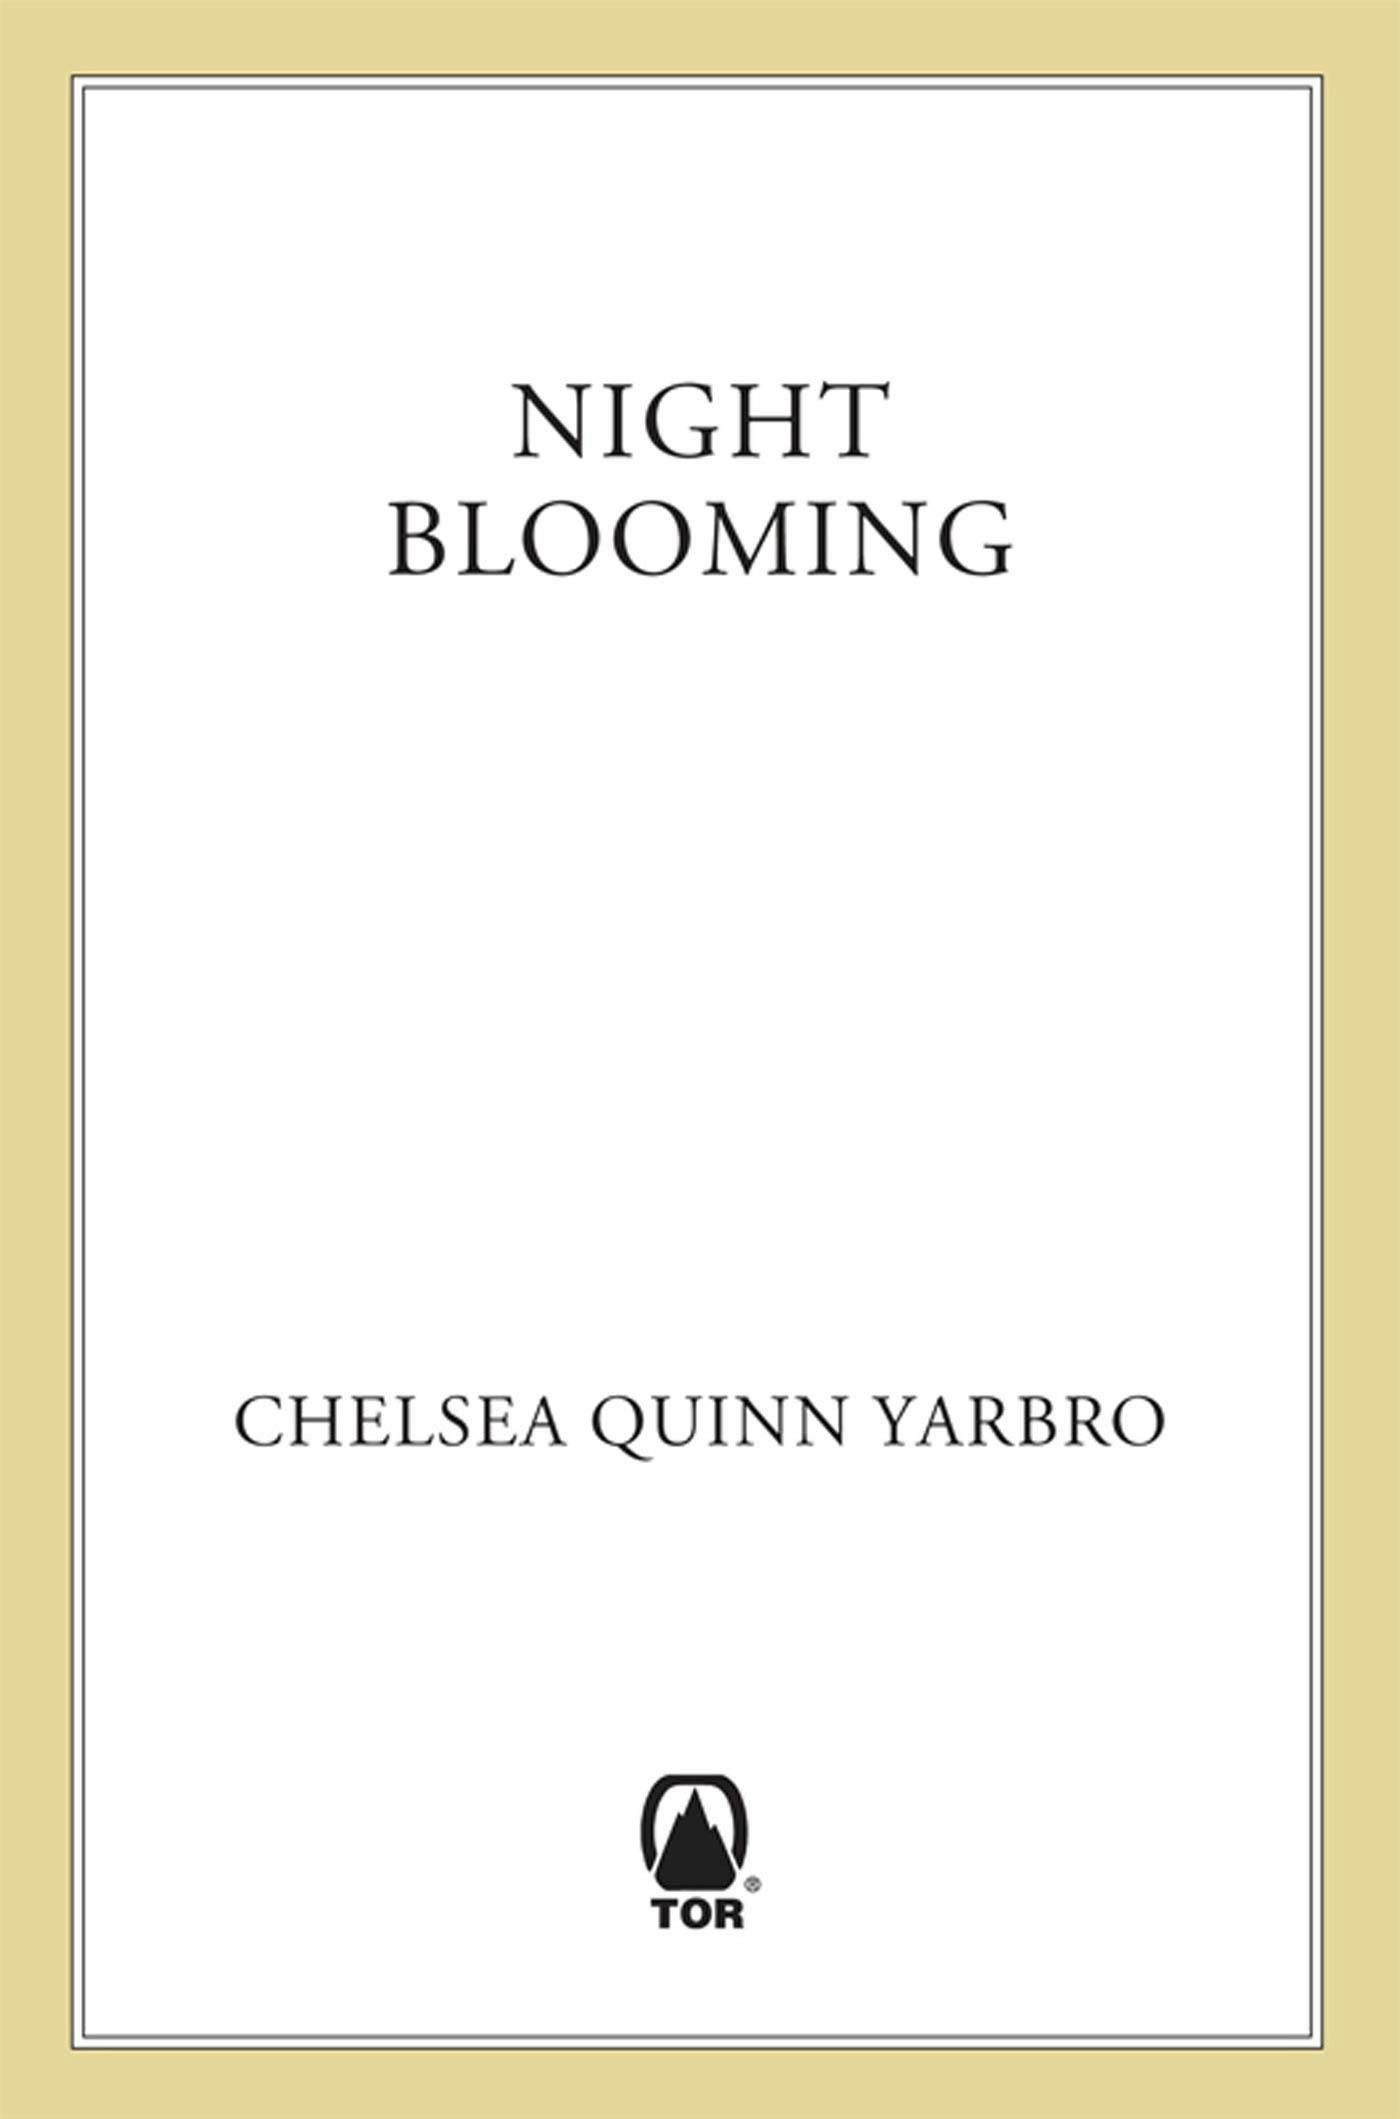 Cover for the book titled as: Night Blooming